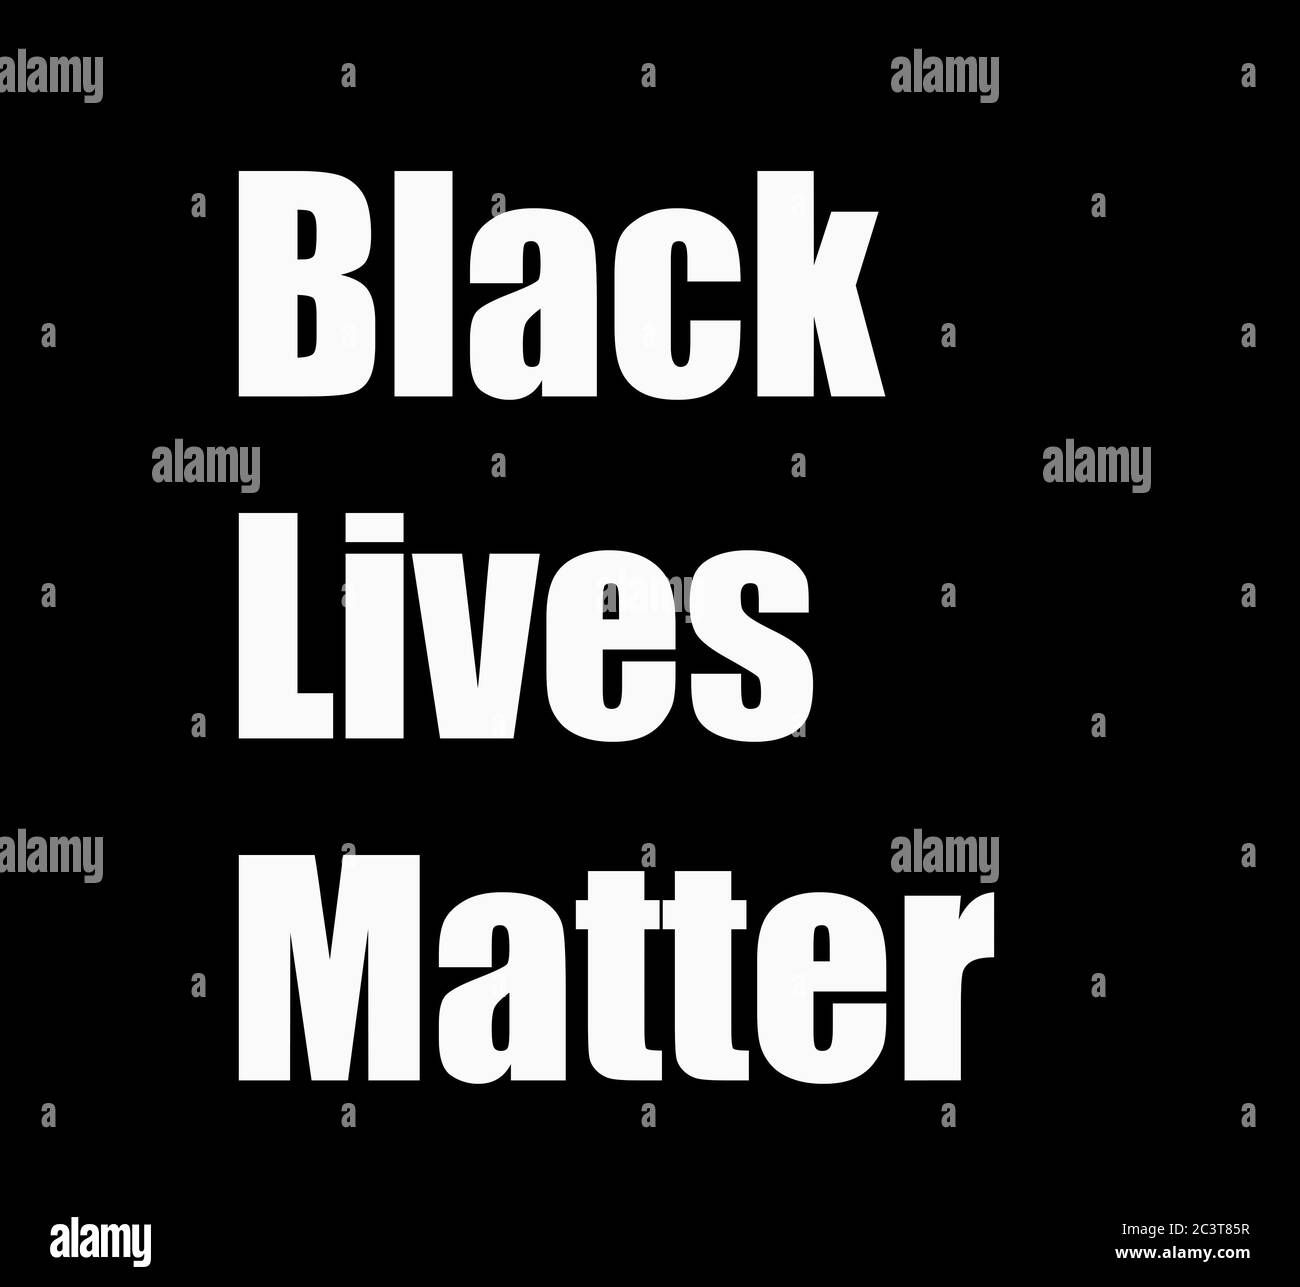 Black lives matter text and lettering card on dark background with White letters, Stock Photo